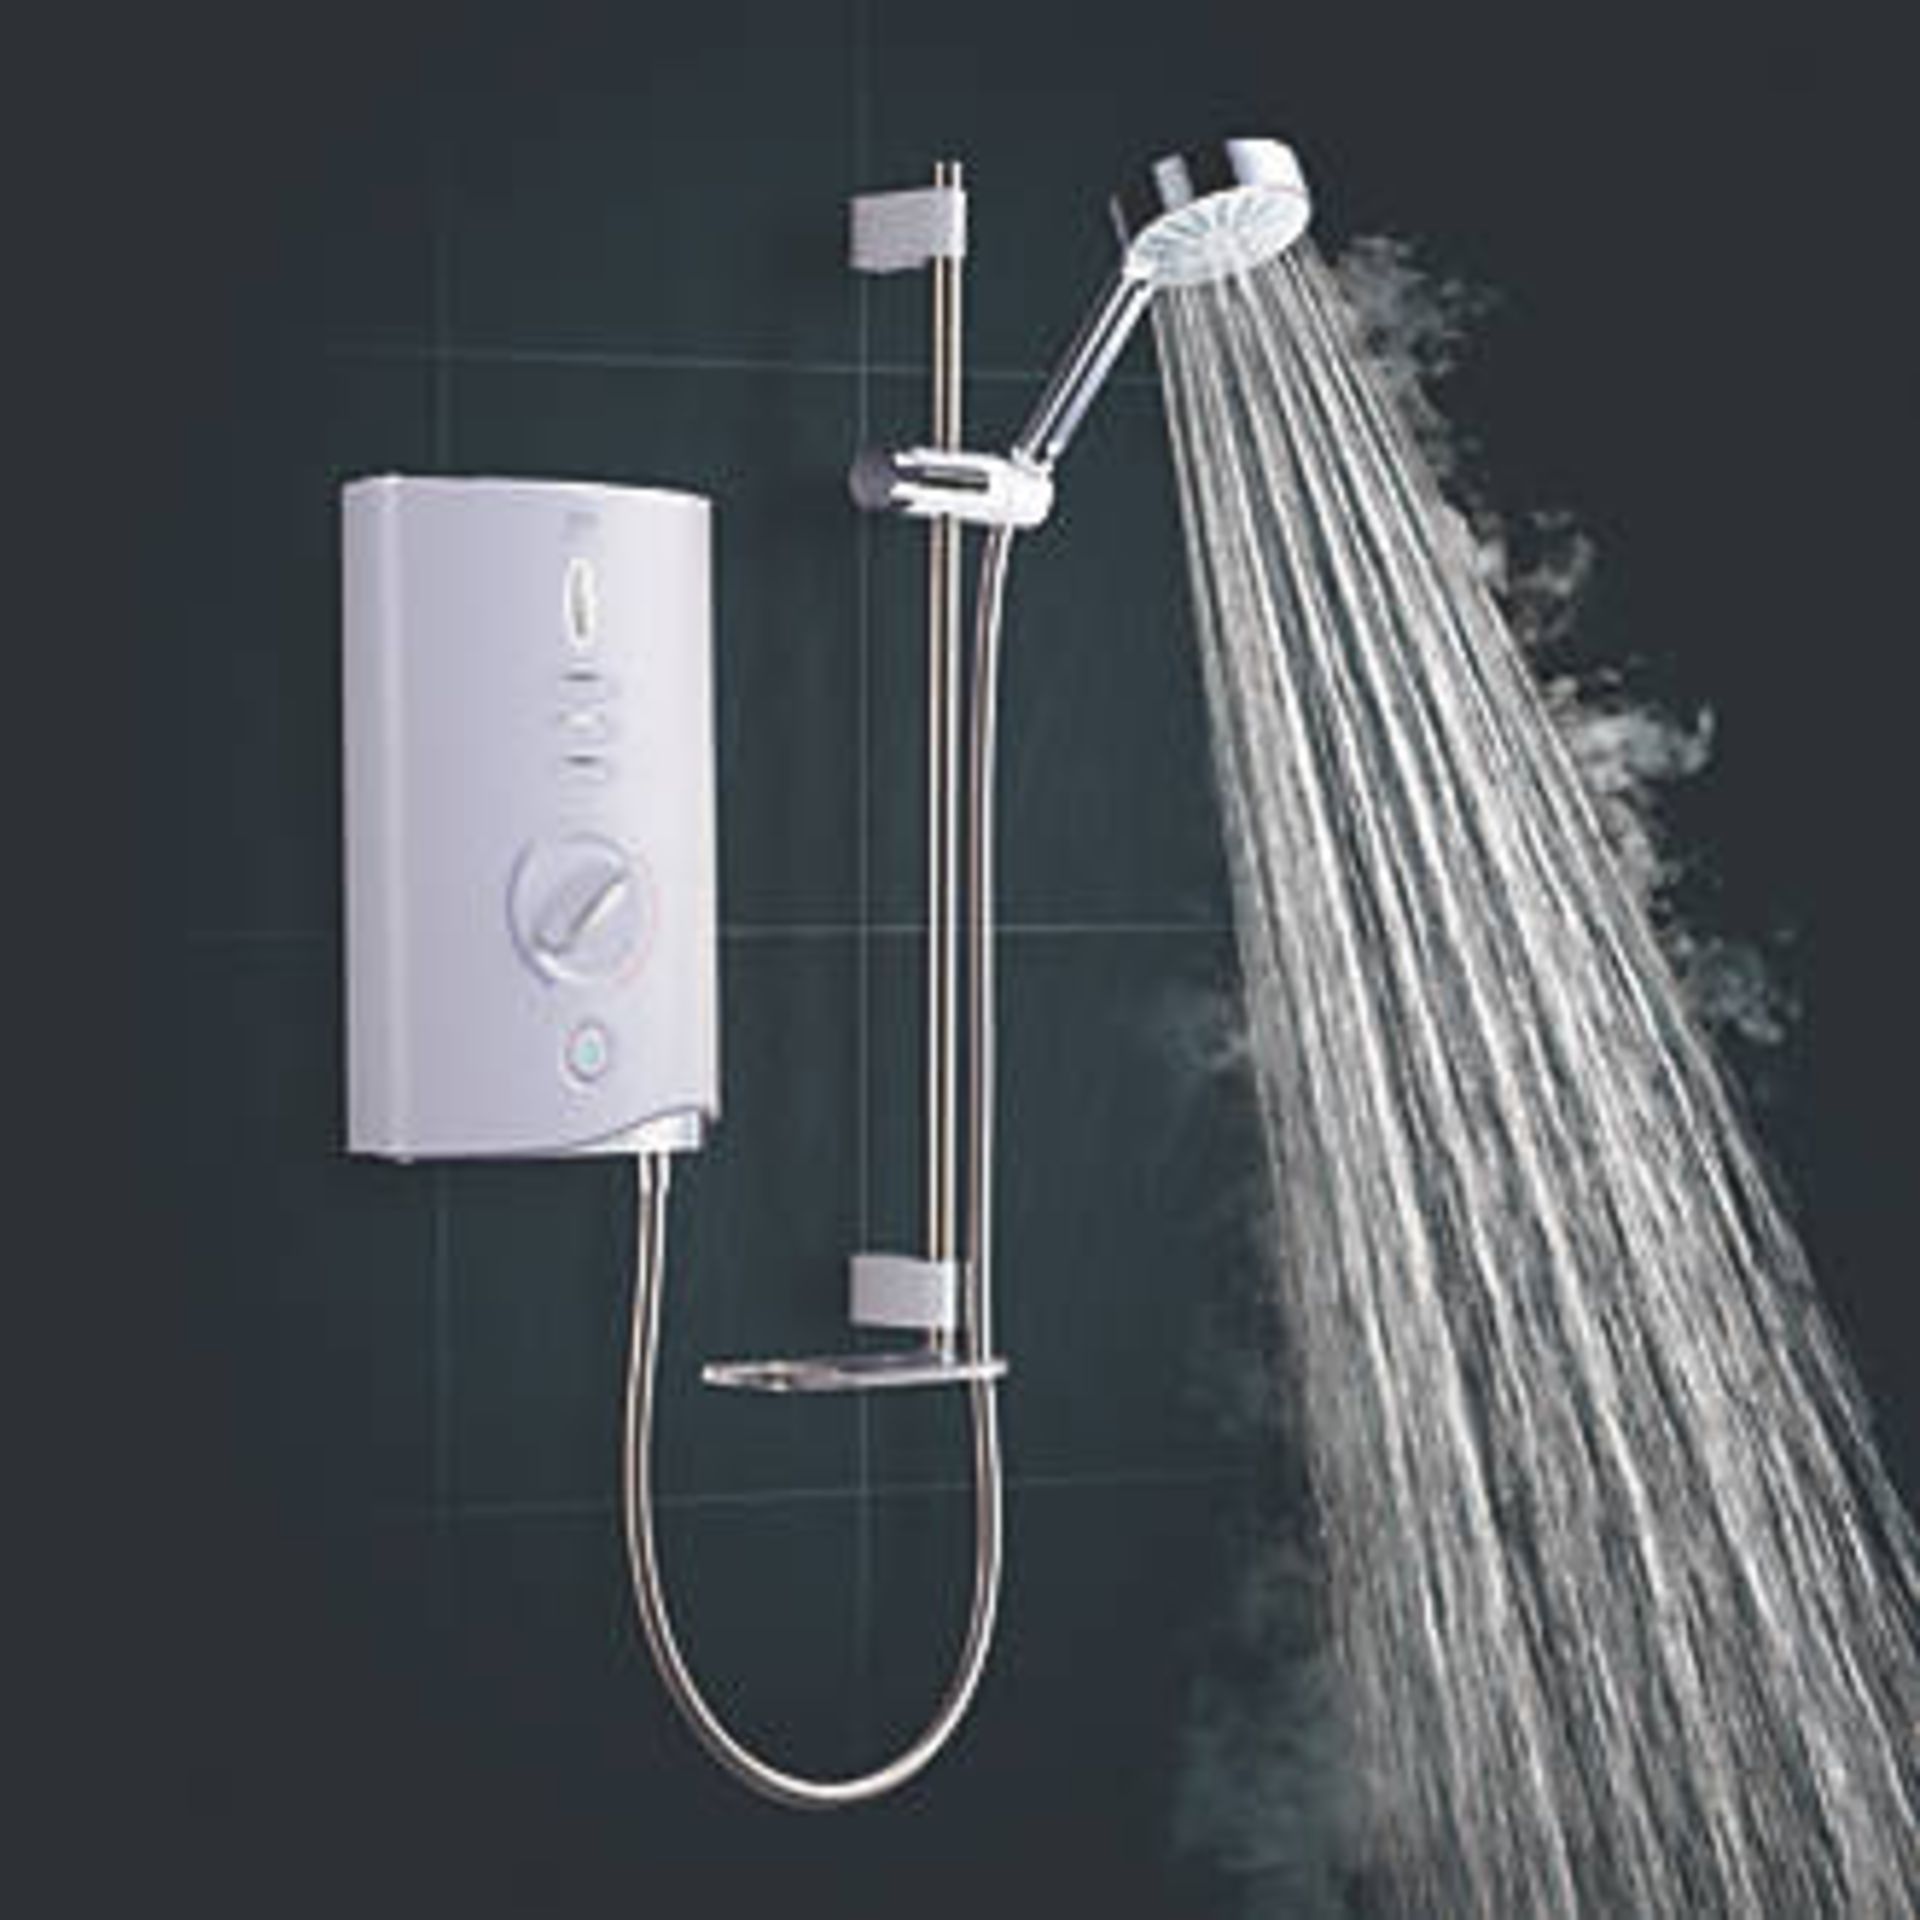 (XL65) Mira Sport Max with Airboost White 9kW Manual Electric Shower. Separate power and tempe...